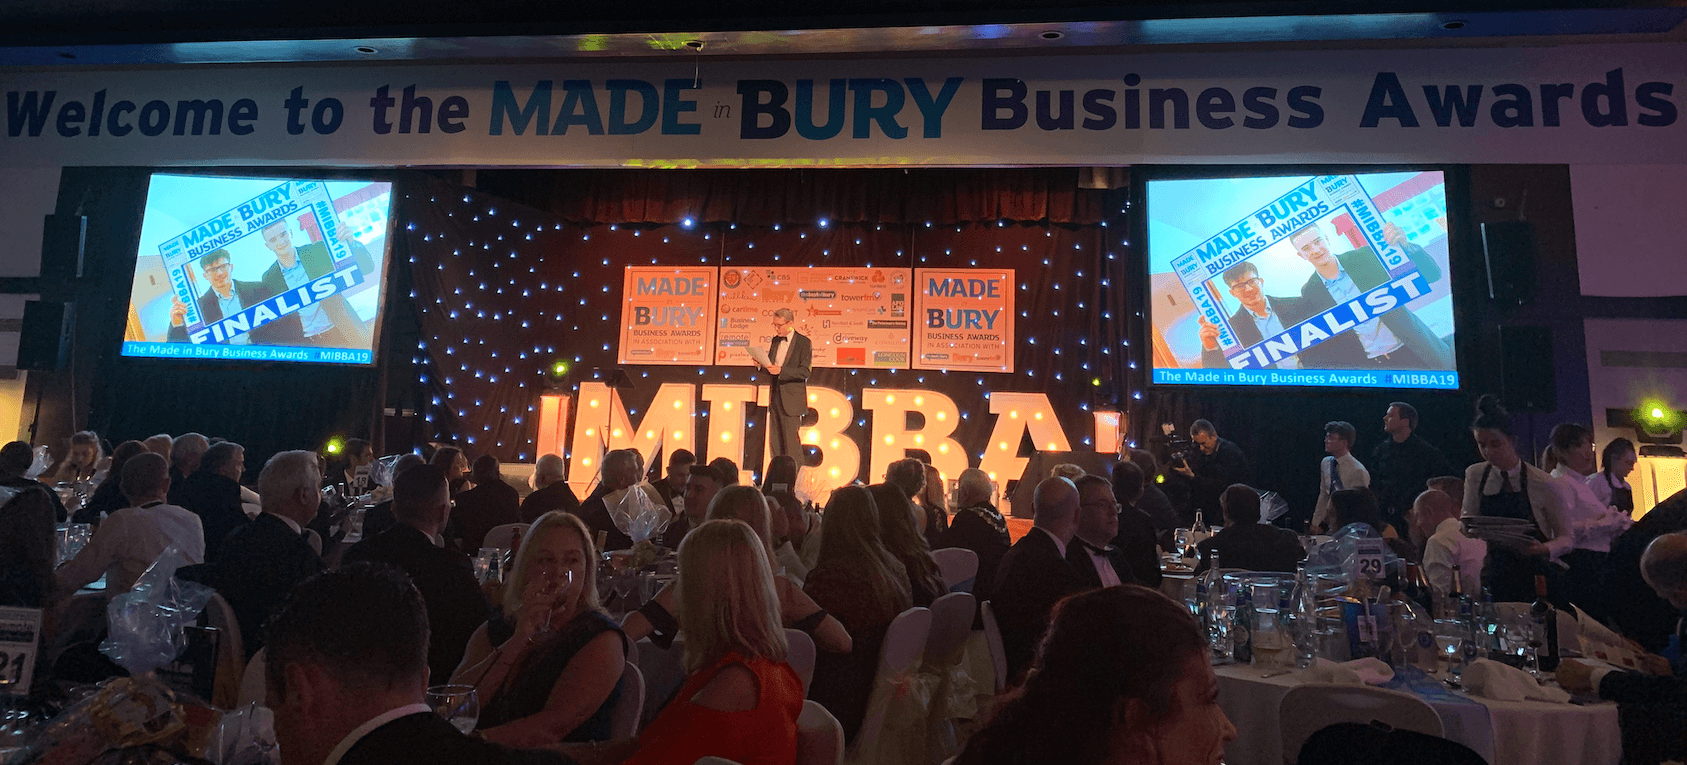 Made in Bury Business Awards Evening 2019